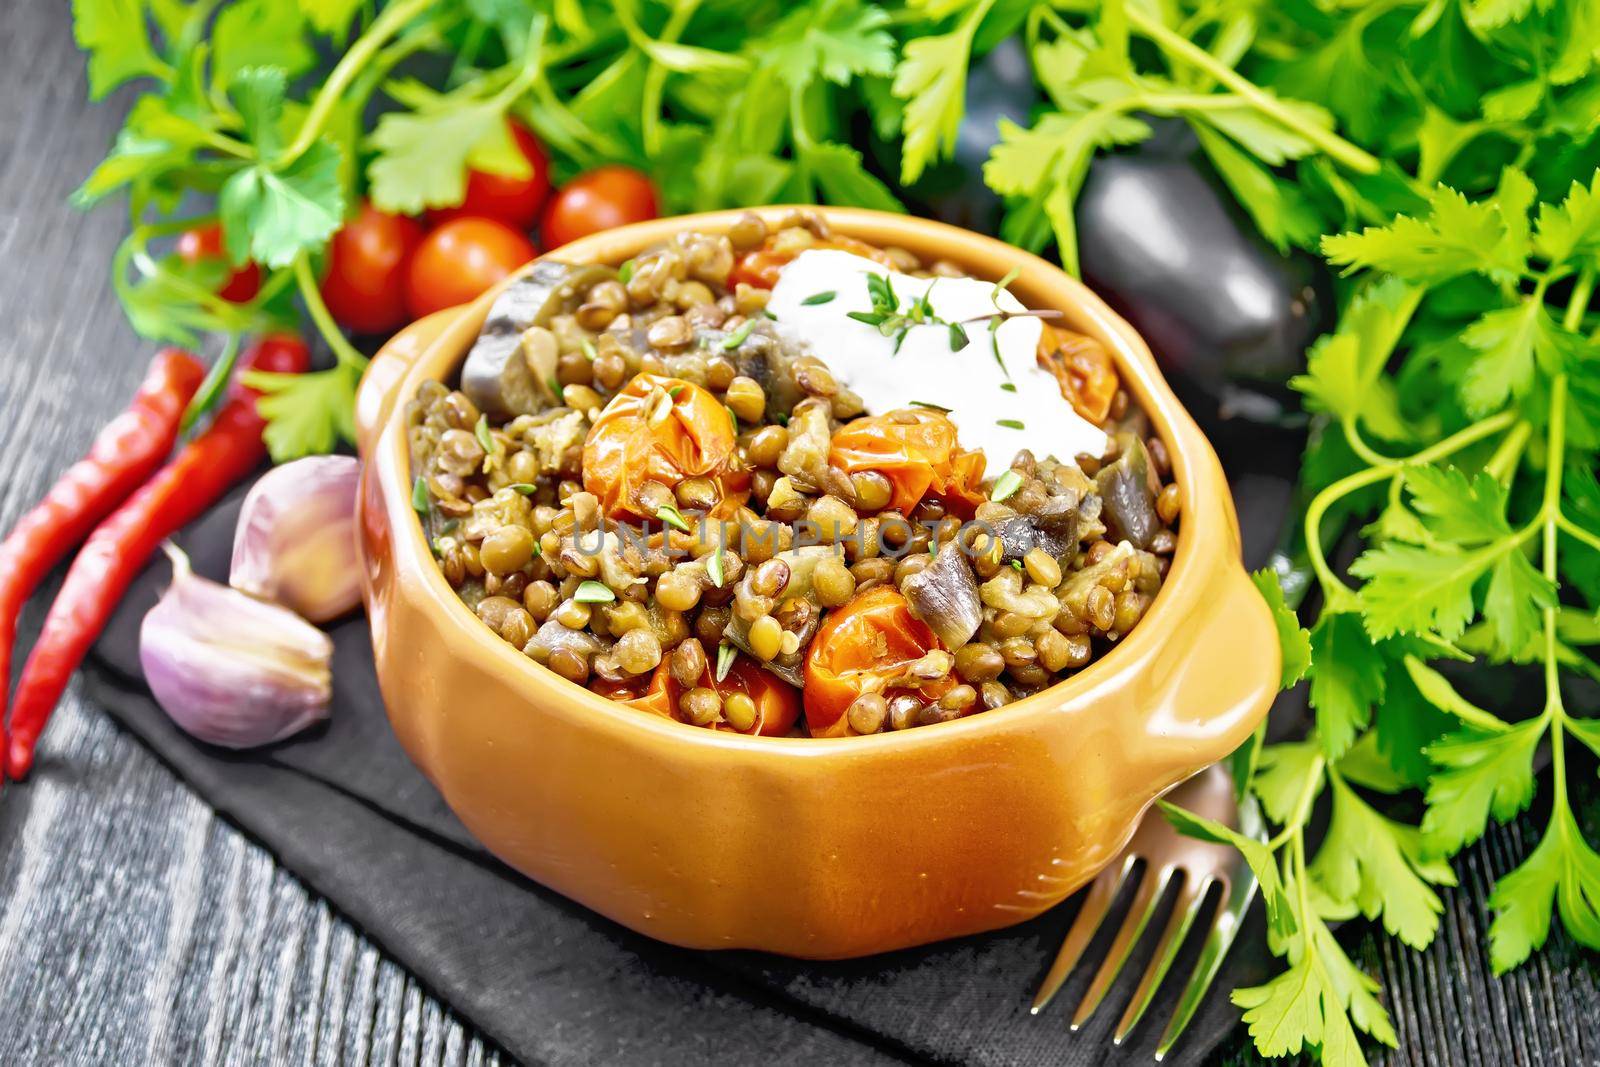 Green lentils stewed with eggplant, tomatoes, garlic and spices, sour cream sauce with a sprig of thyme in a bowl on a towel, parsley on wooden board background